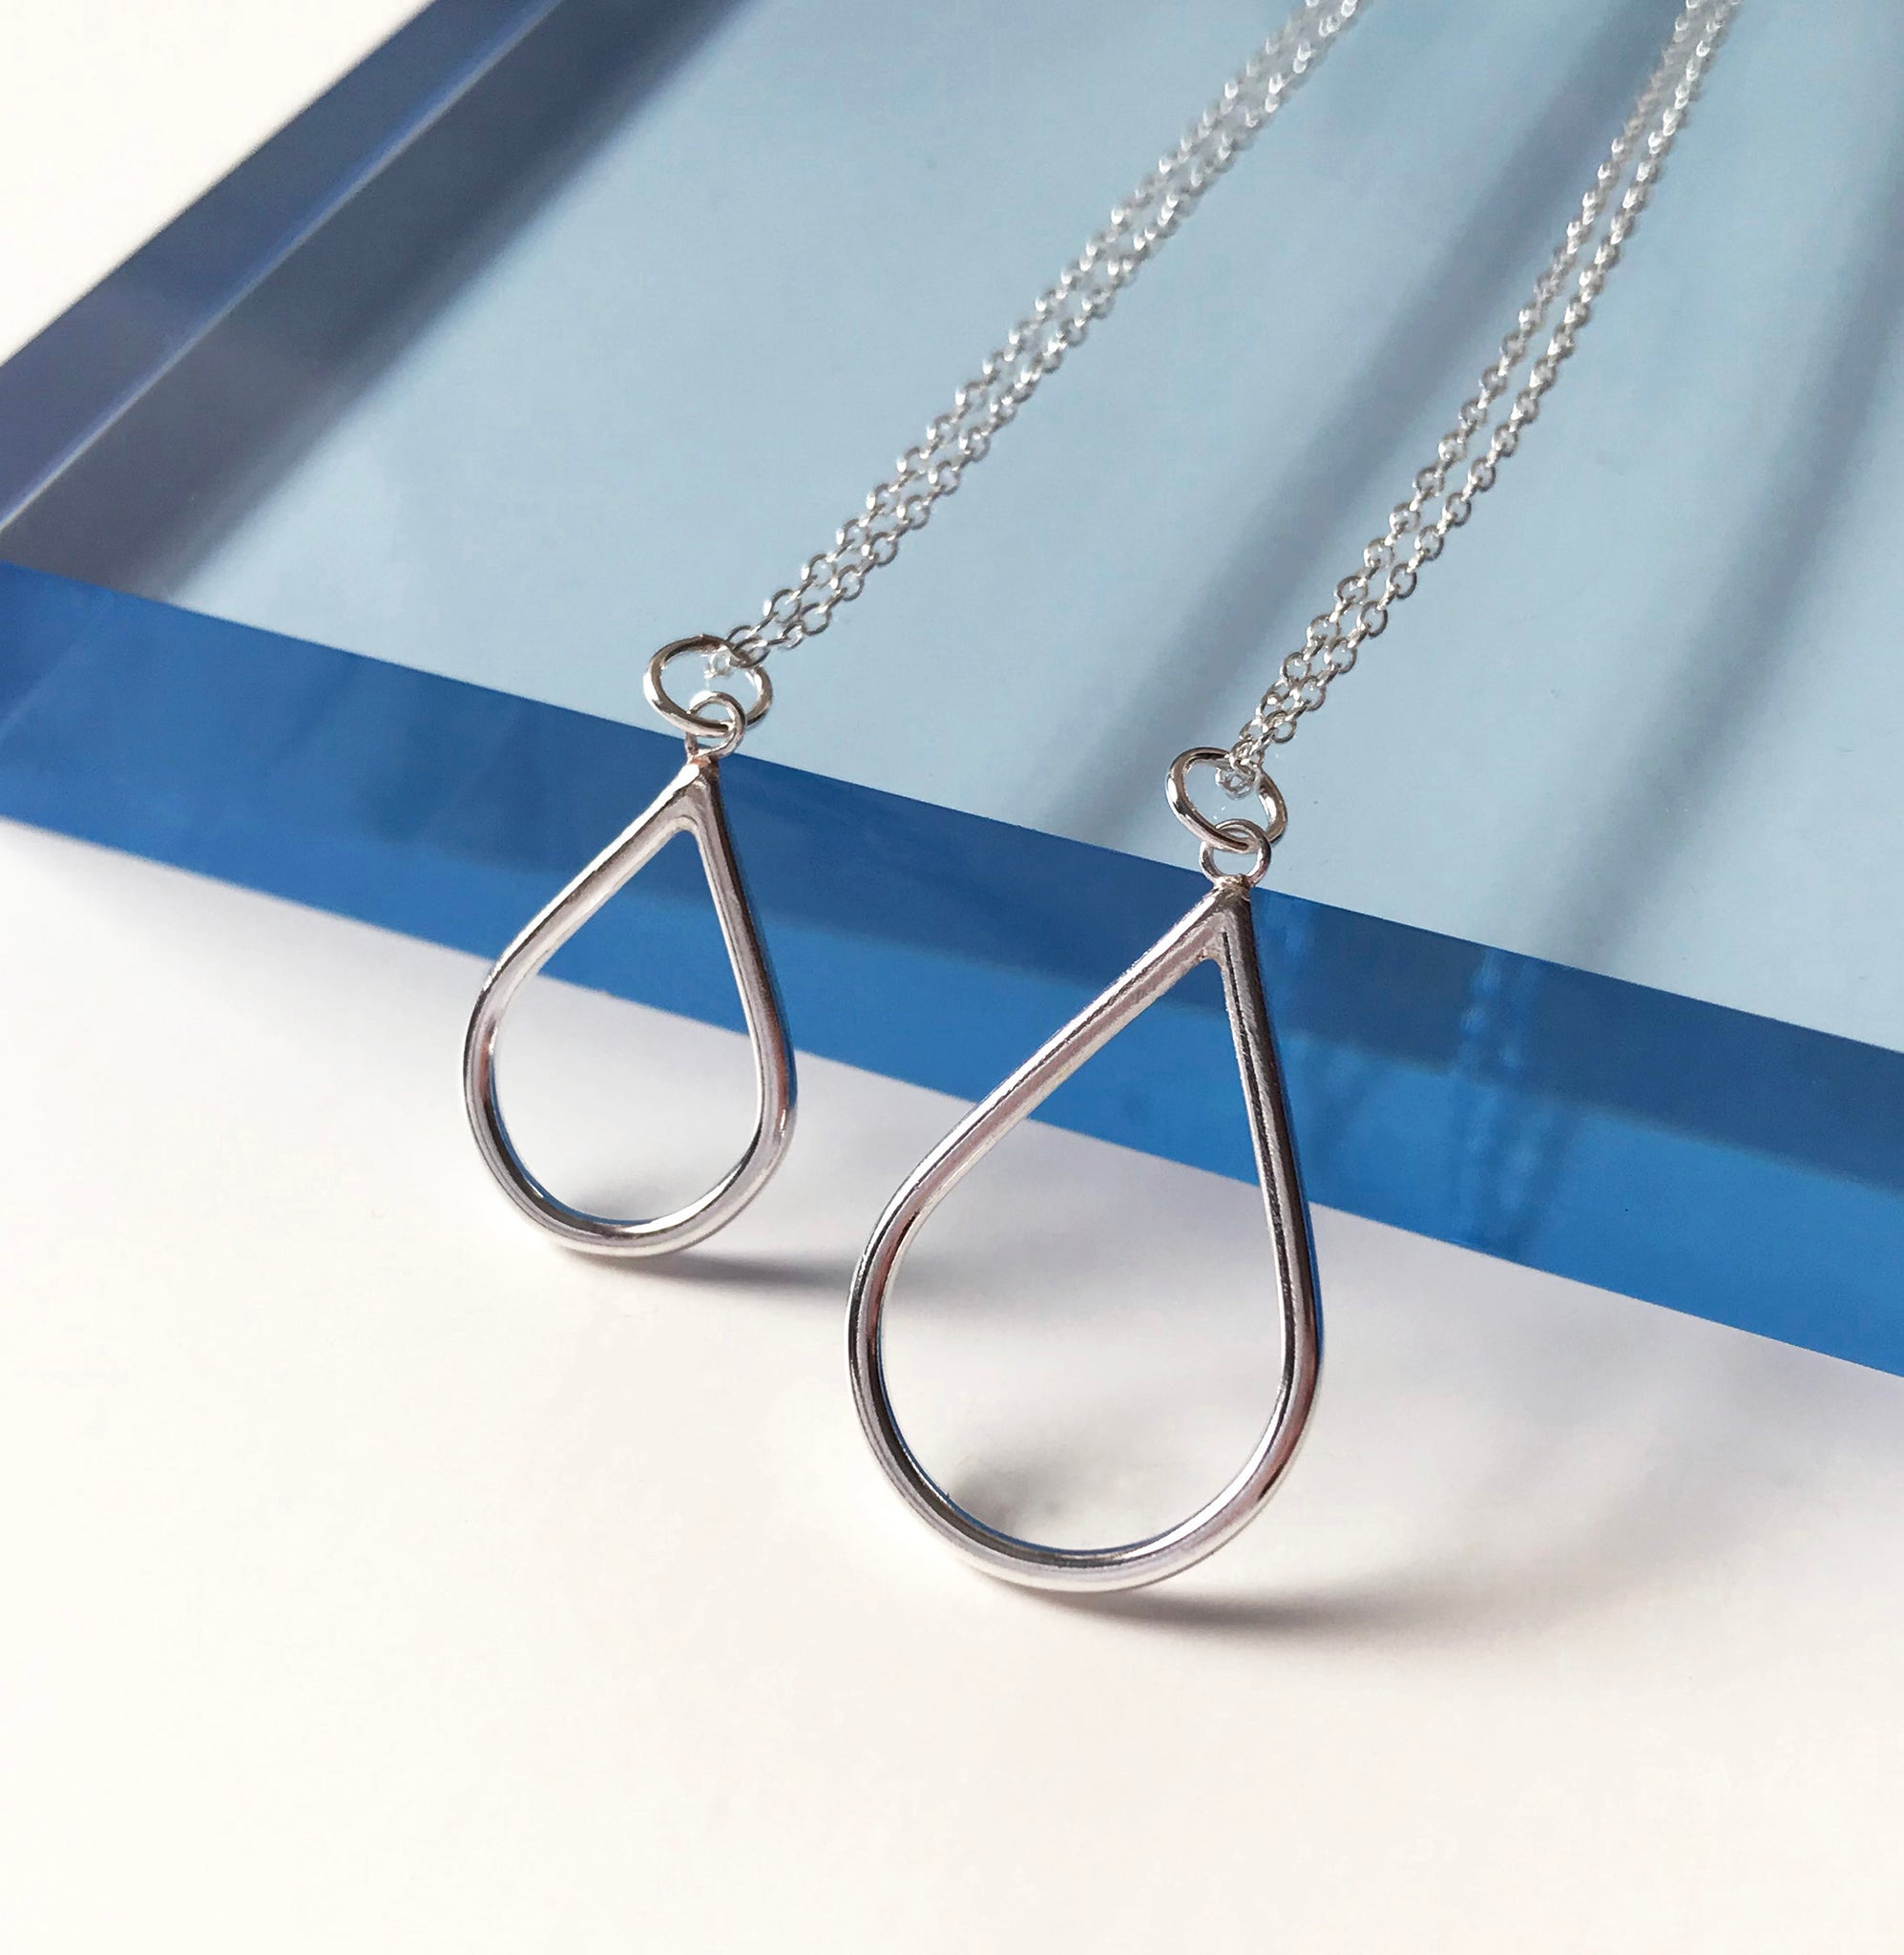 Large and Small Silver Raindrop Pendants Necklace by Kate Wimbush Jewellery